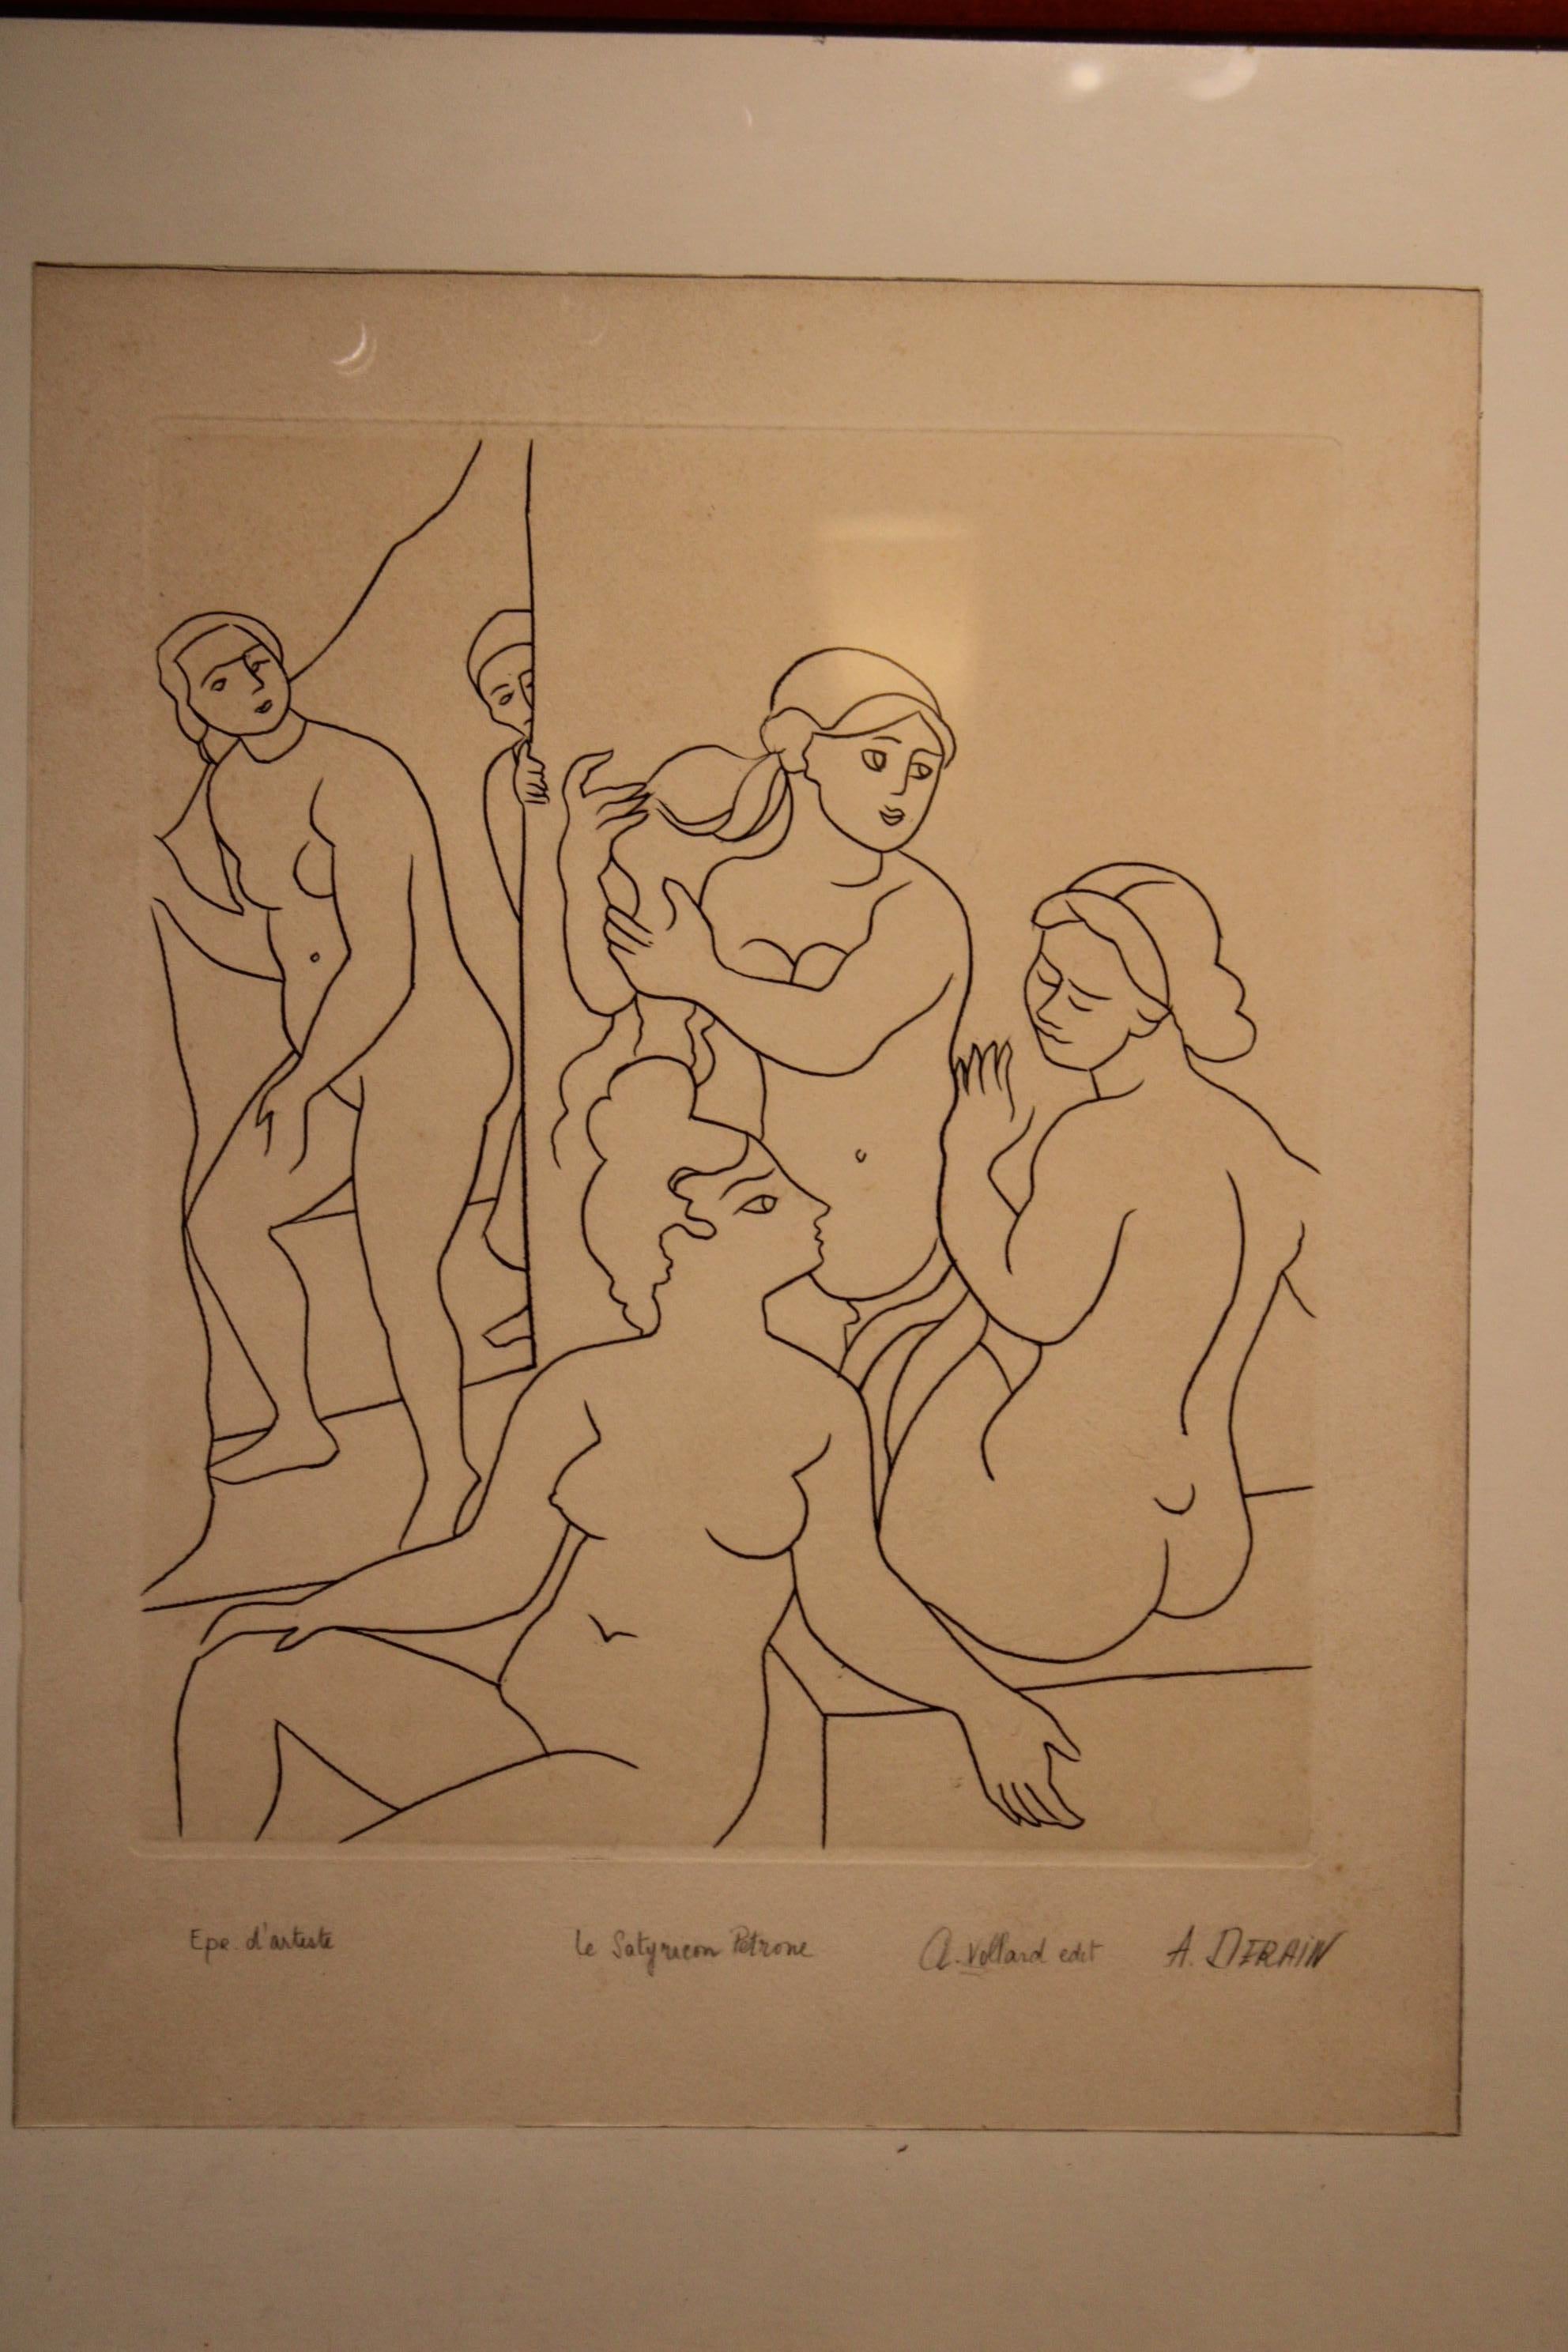 Paper Engraving by the French Painter André Derain, Dated 1951